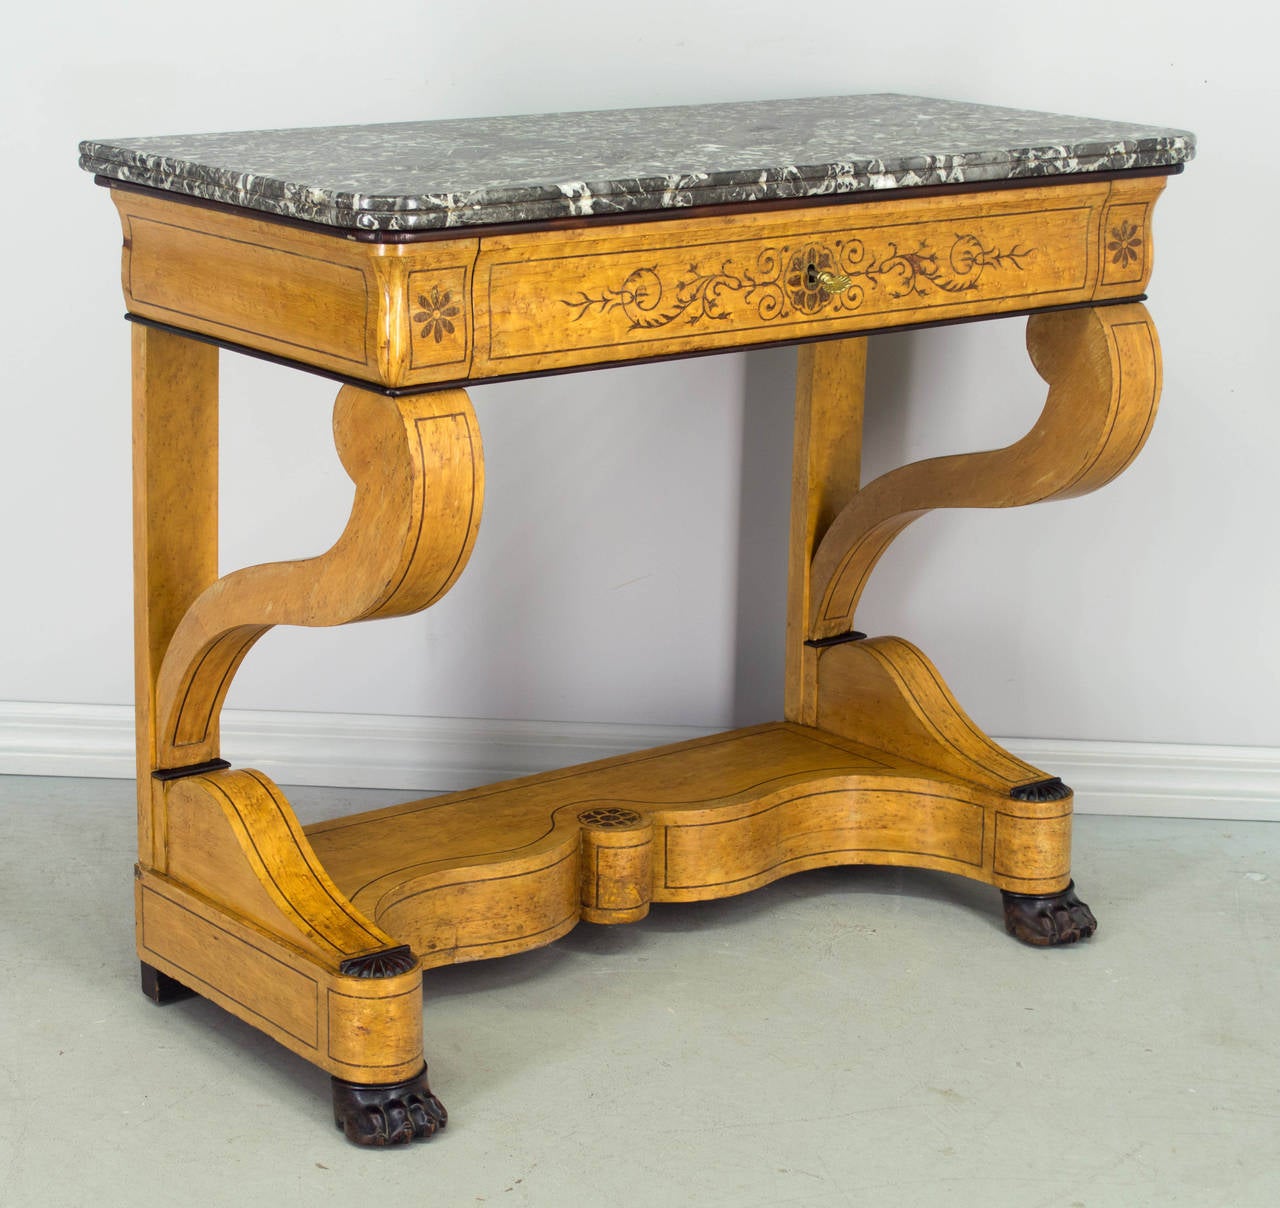 19th c. Charles X style console, c.1860-1880, made of birds eye maple veneer, with a dovetailed drawer and a thick grey veined marble top. Nice inlay and French polish finish. Working lock and key. Good original condition with some veneer missing on